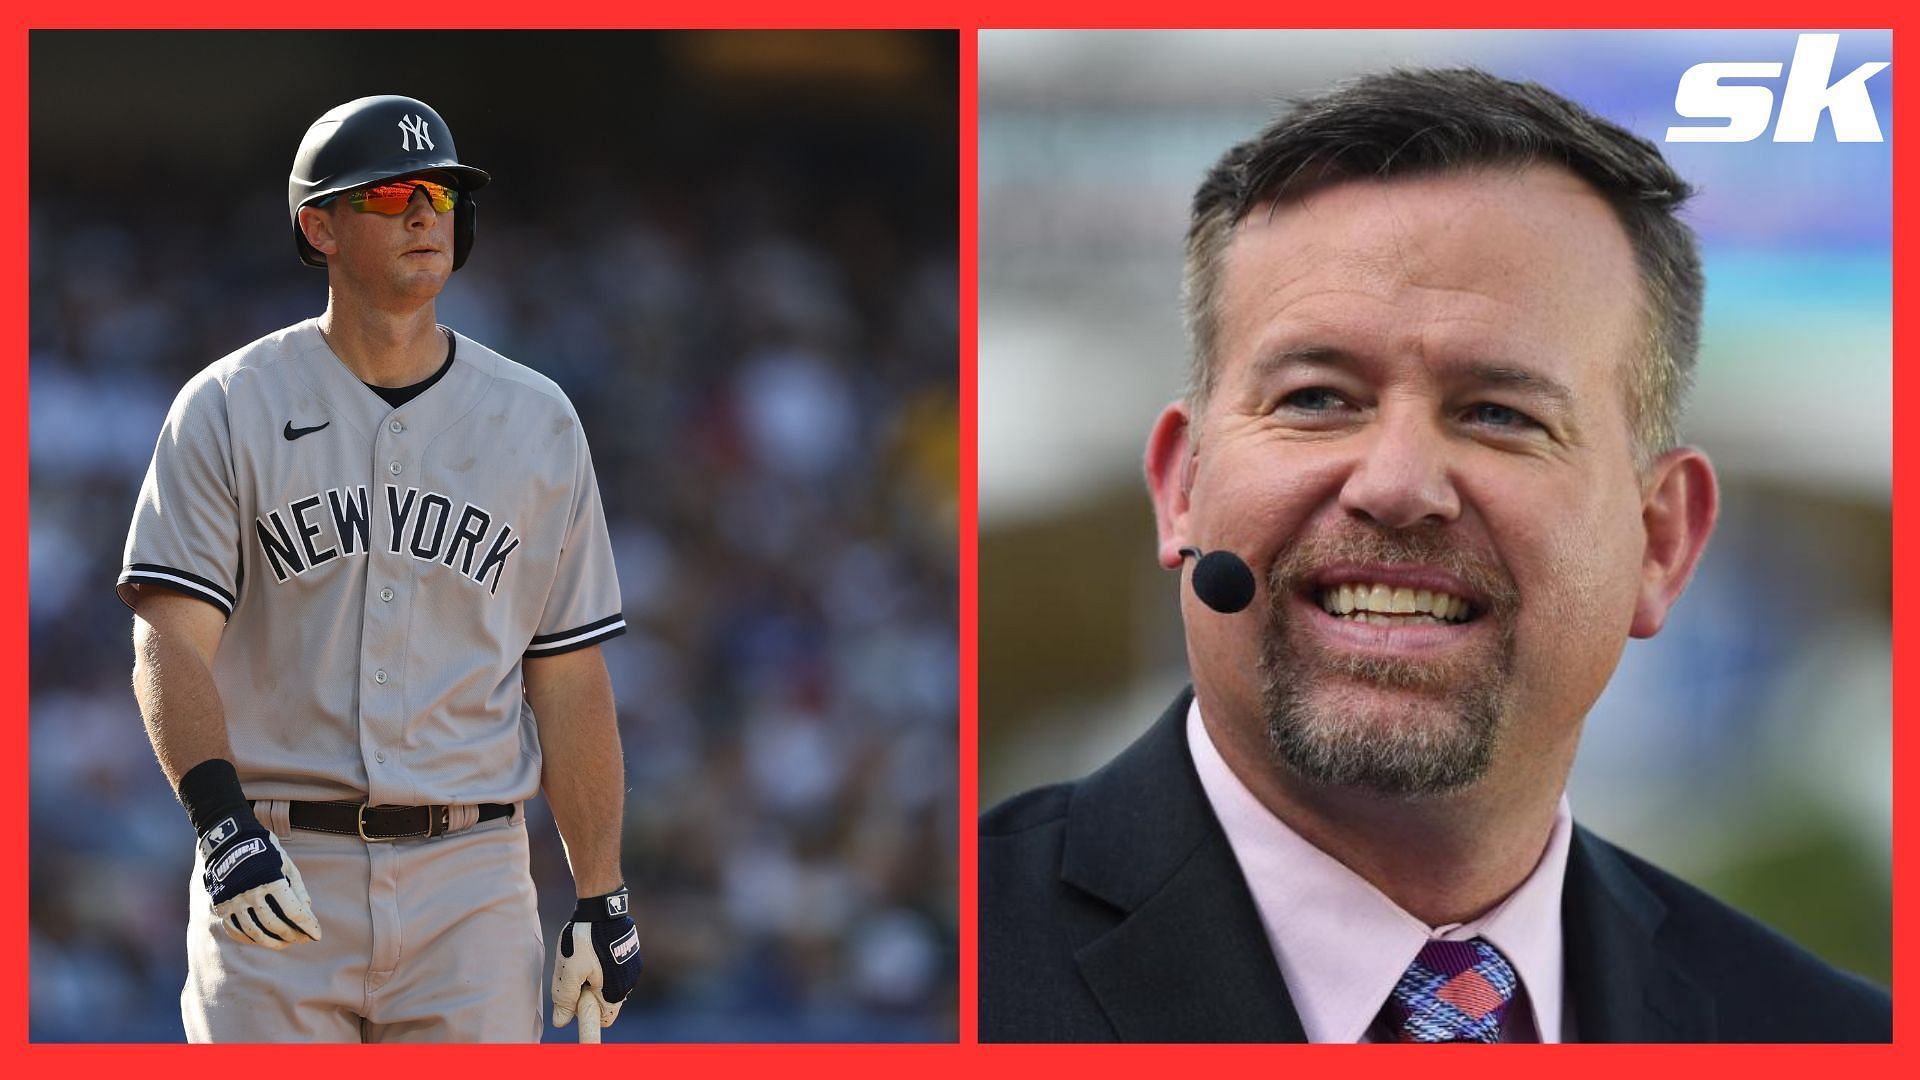 Alex Rodriguez gets 100% real on Yankees' Sean Casey hiring